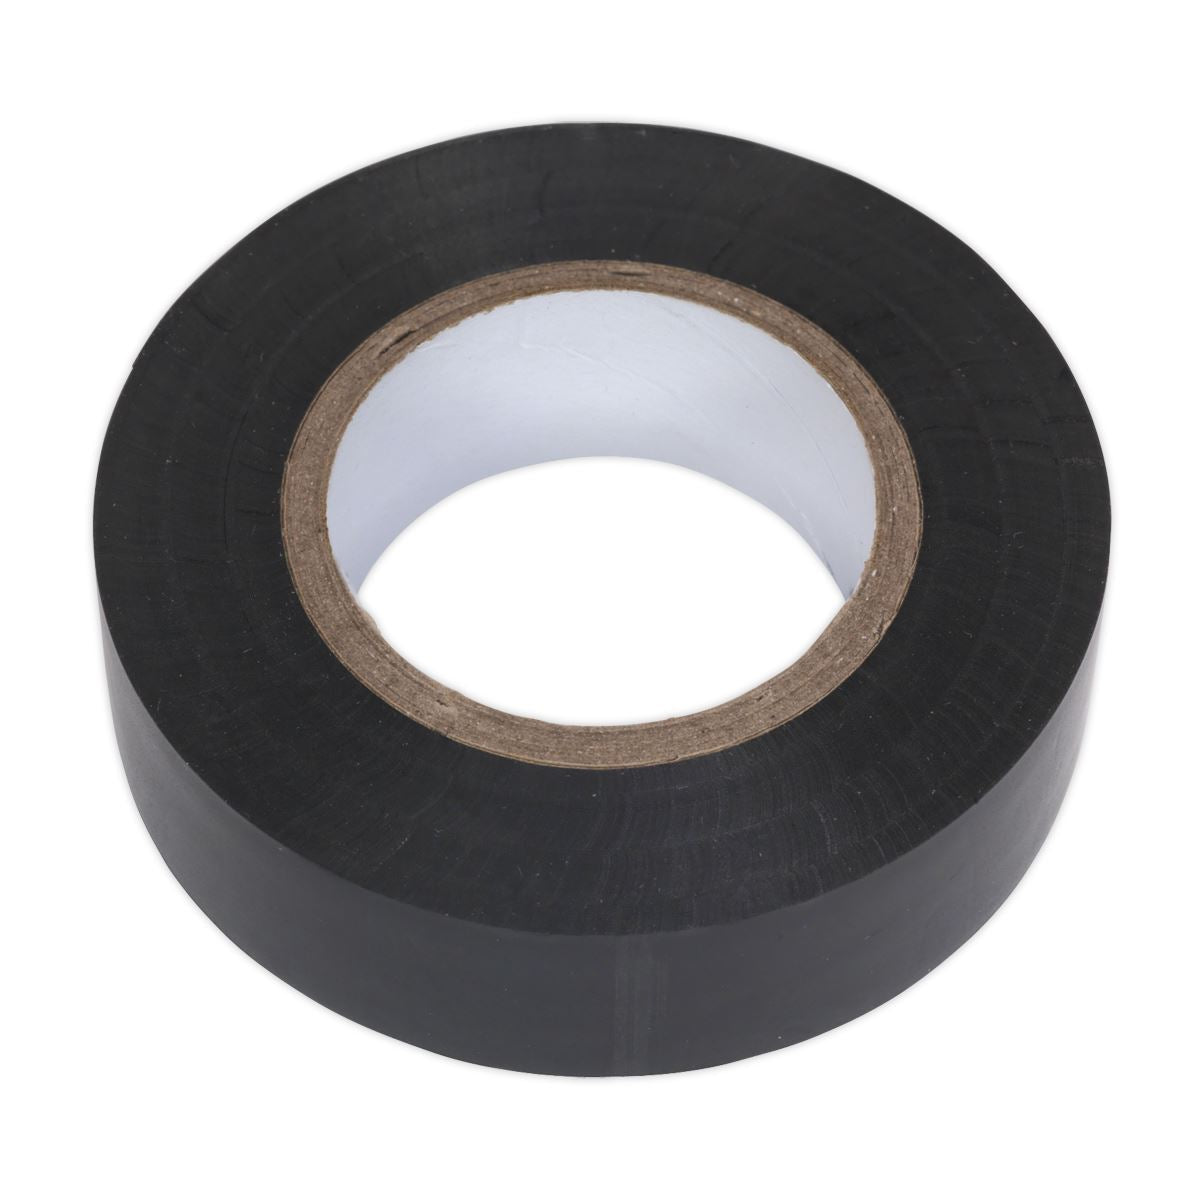 Sealey PVC Insulating Tape 19mm x 20m Black Pack of 10